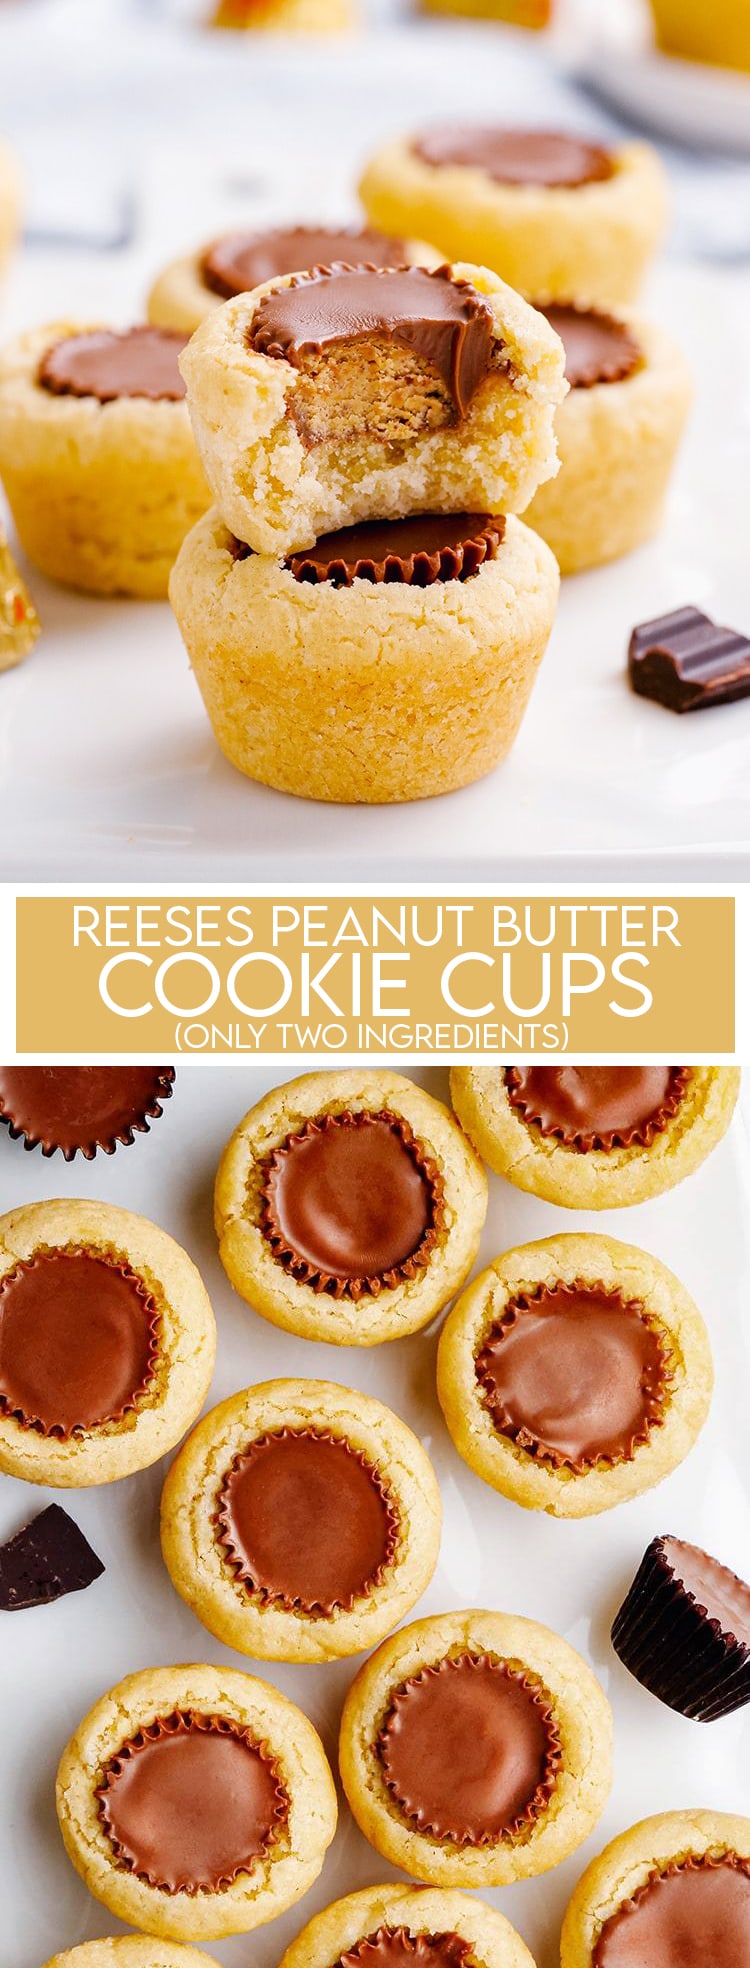 Two photo collage of of peanut butter cookie cups with text reeses peanut butter cookie cups.